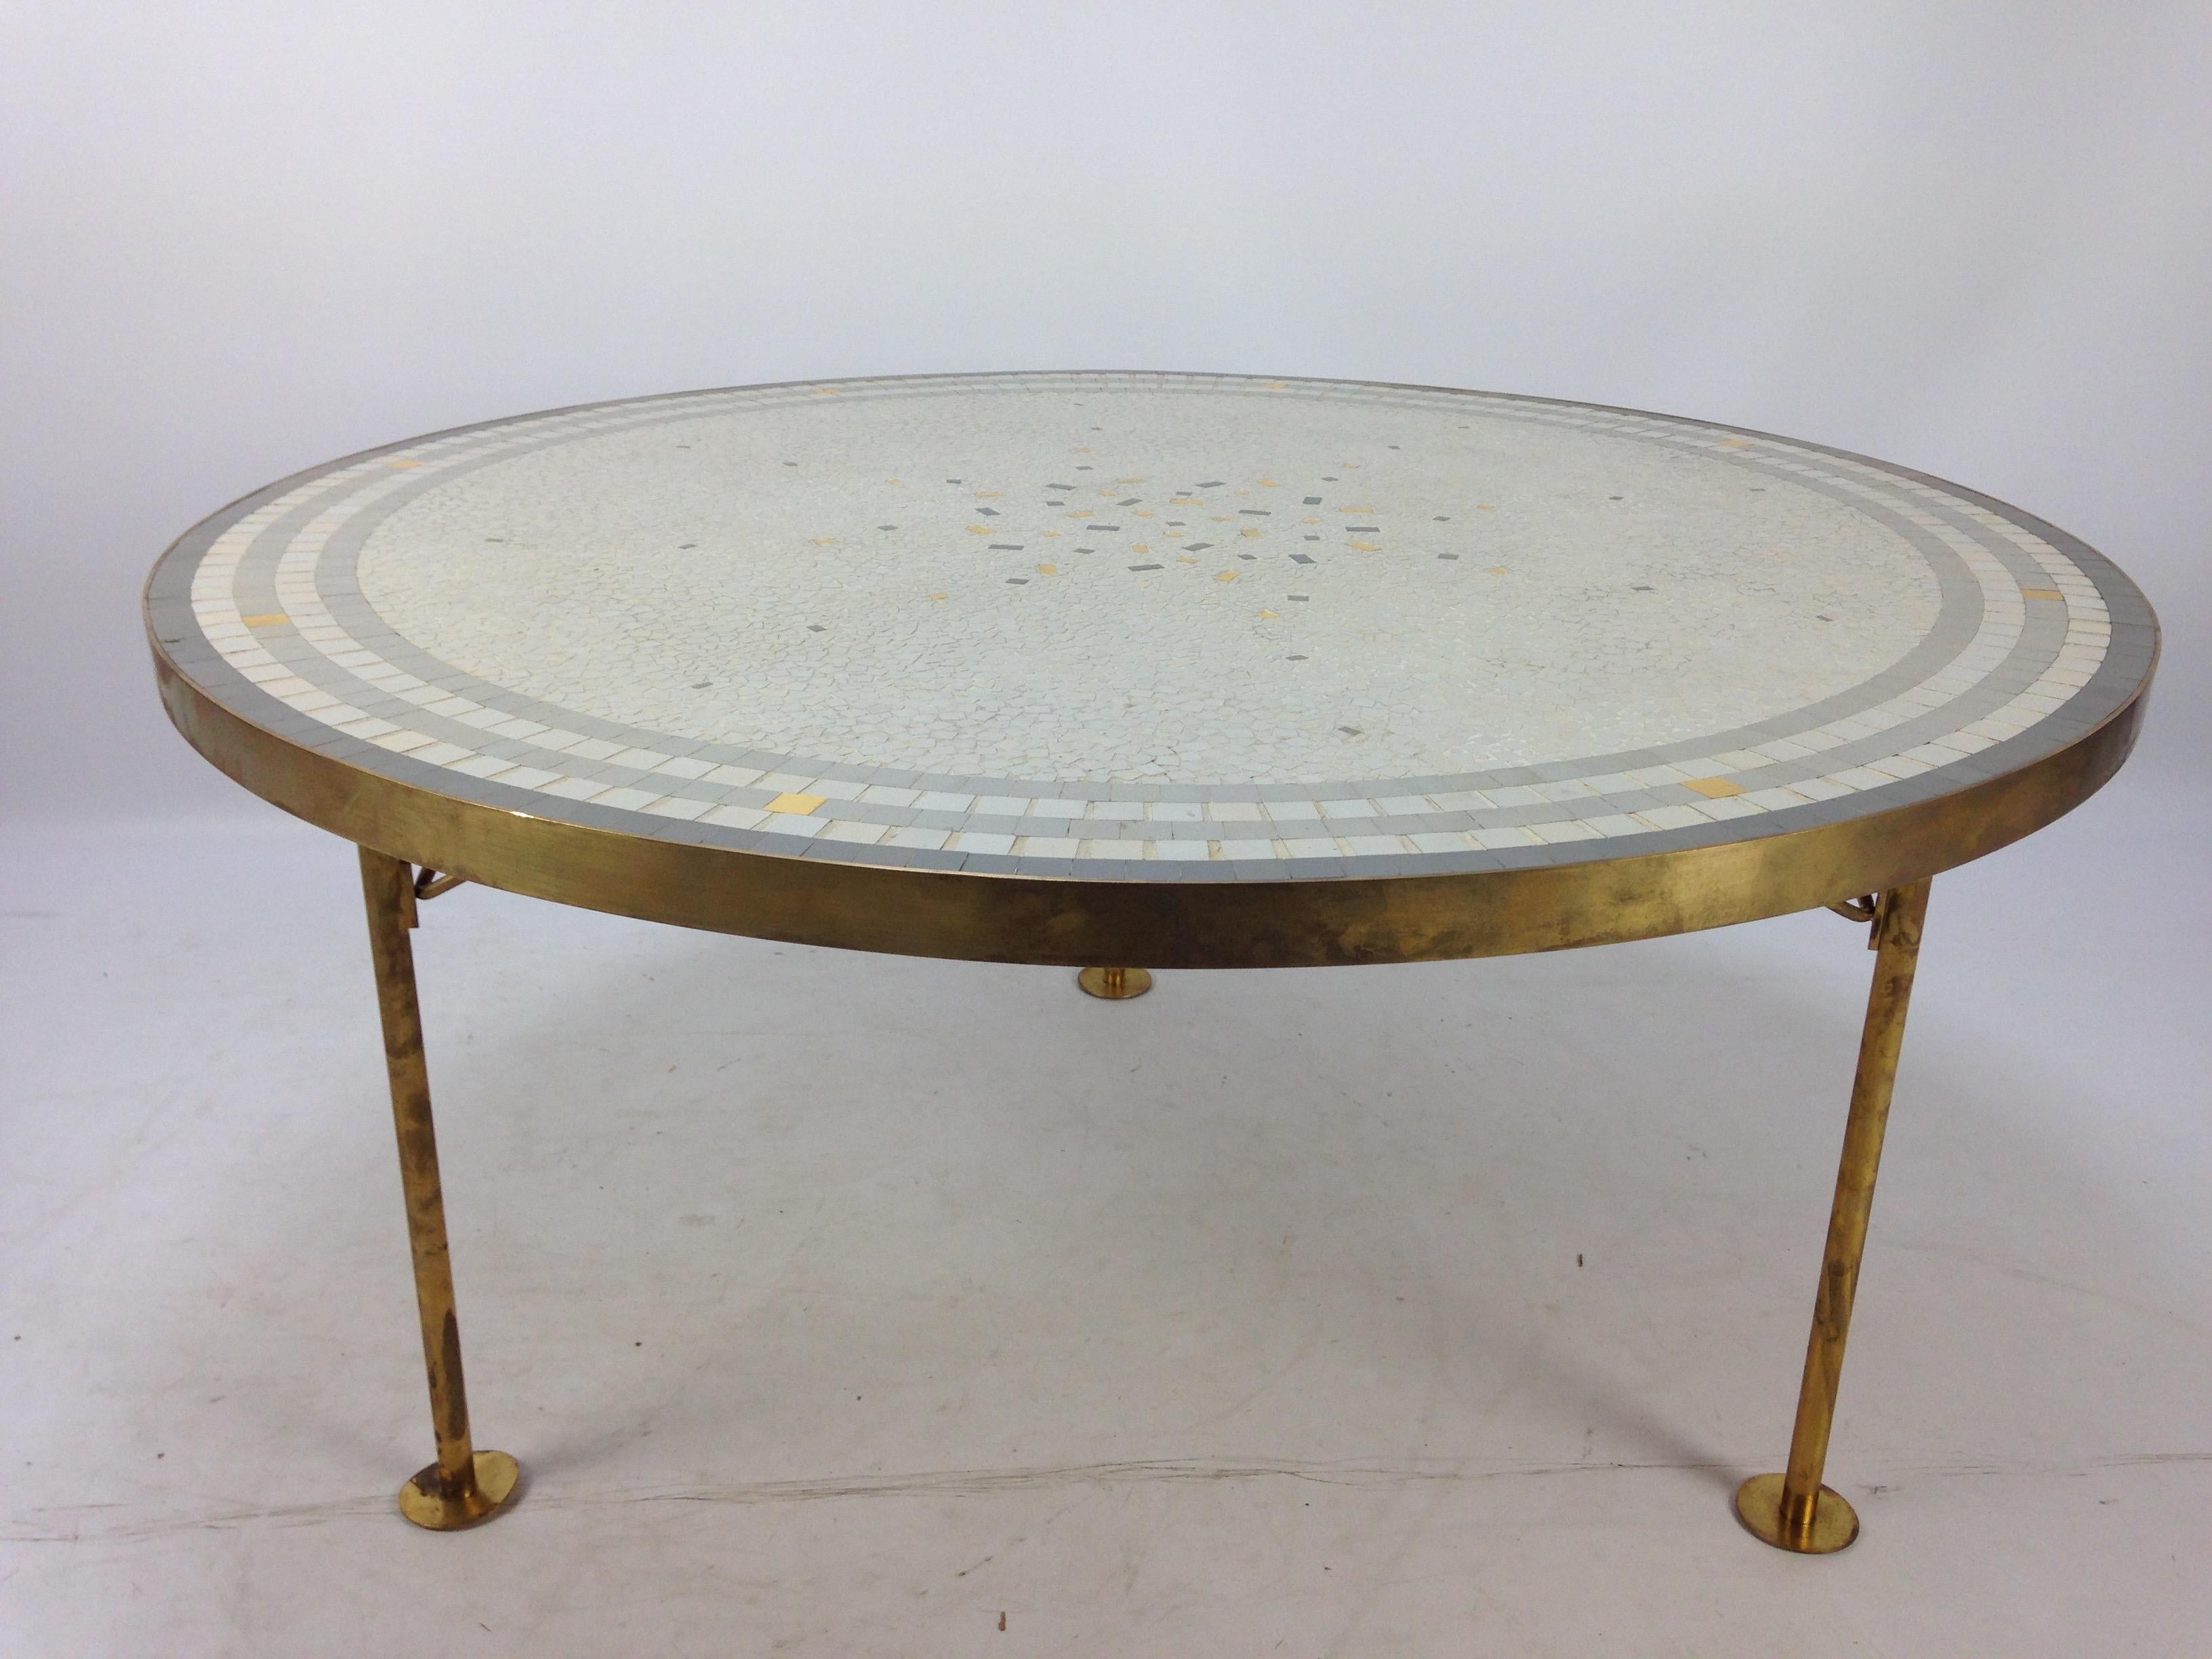 Beautiful round Mosaic top coffee table by Berthold Muller. 

Brass band around it on three legs. 

The top has a stunning composition and the brass has a lovely patina. 

Berthold Muller-Oerlinghausen (1893-1979) was a German sculptor who was